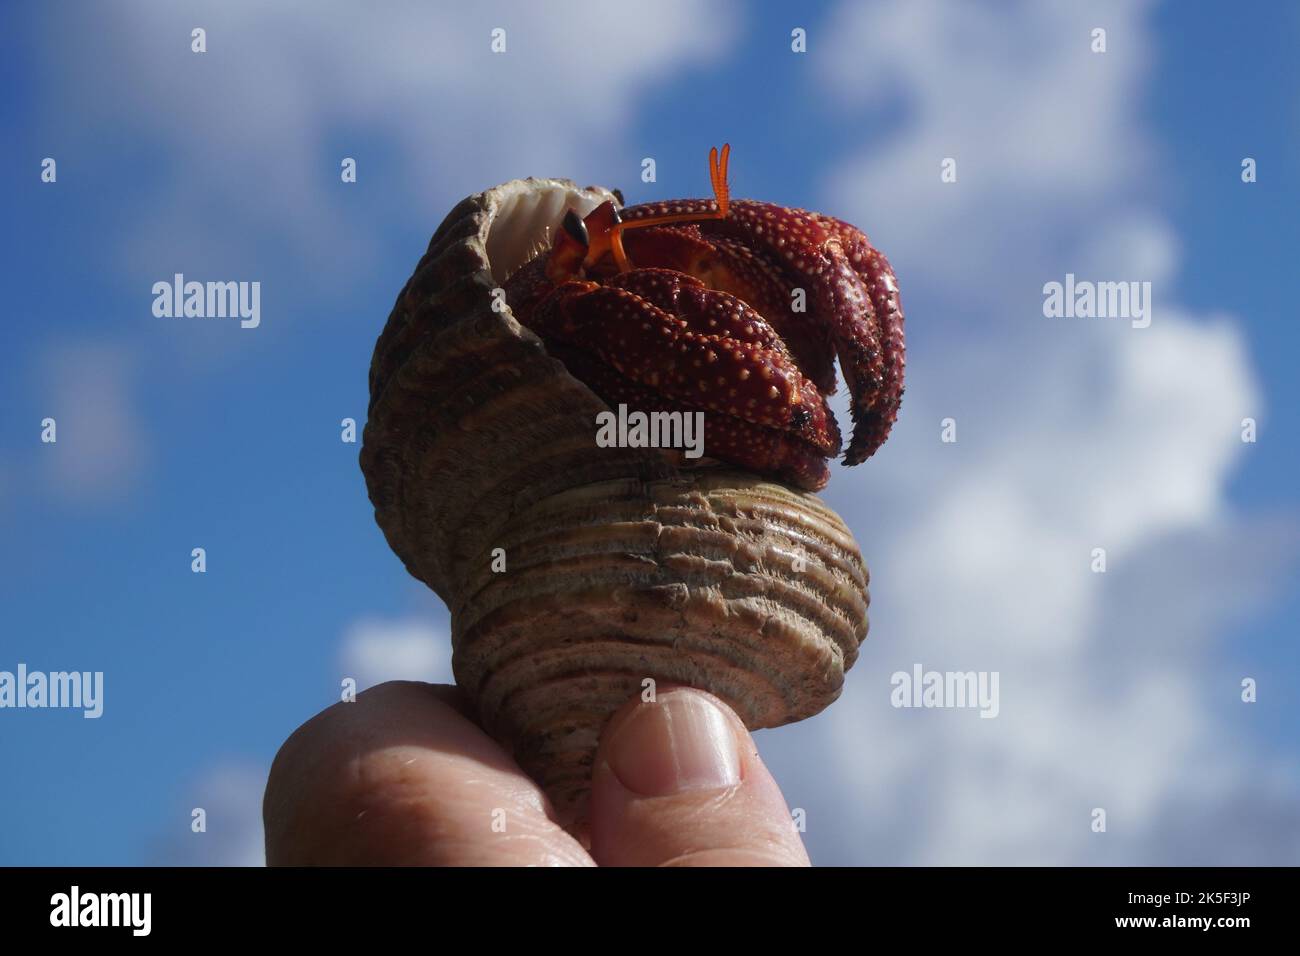 Suberites domuncula is a sea sponge that grows on a gastropoda shell  inhabited for a hermit crab Stock Photo - Alamy